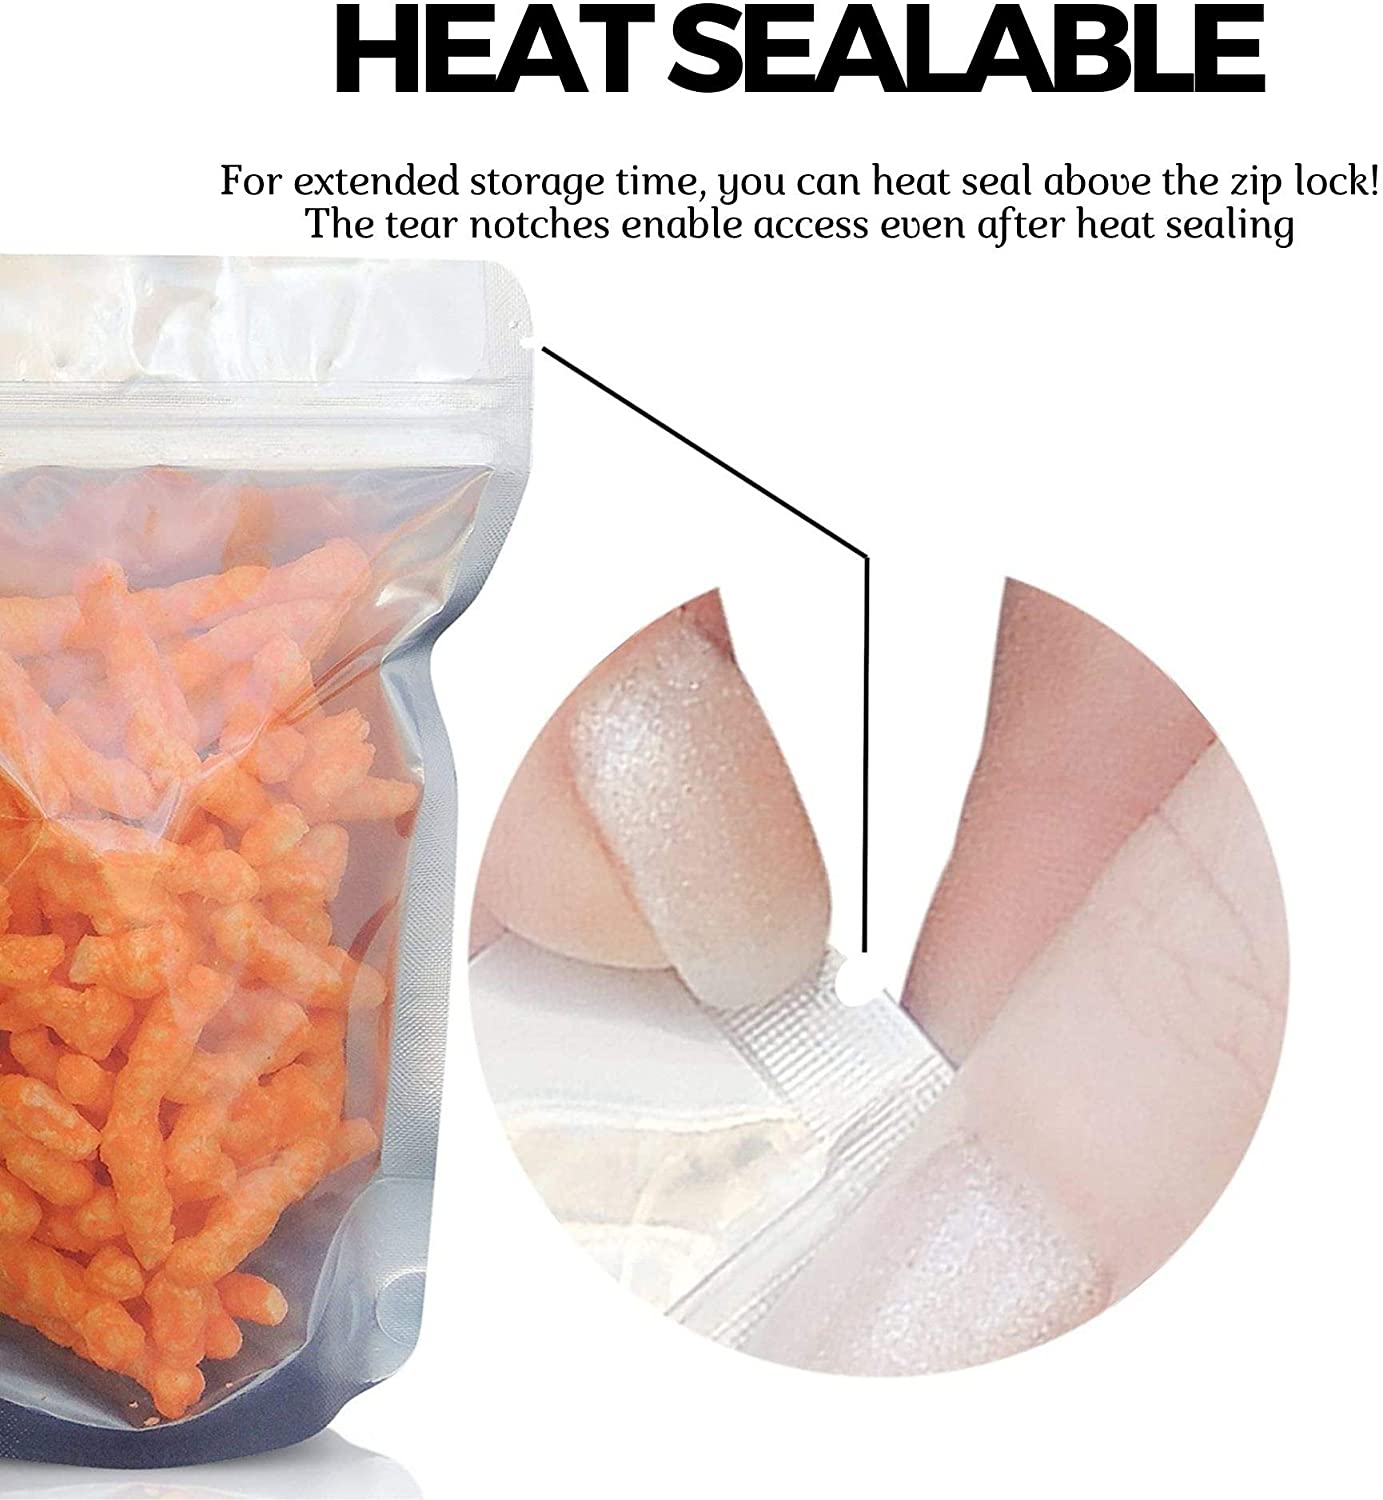 Clear Stand Up Self Seal Bags Plastic Pouches Food Storage